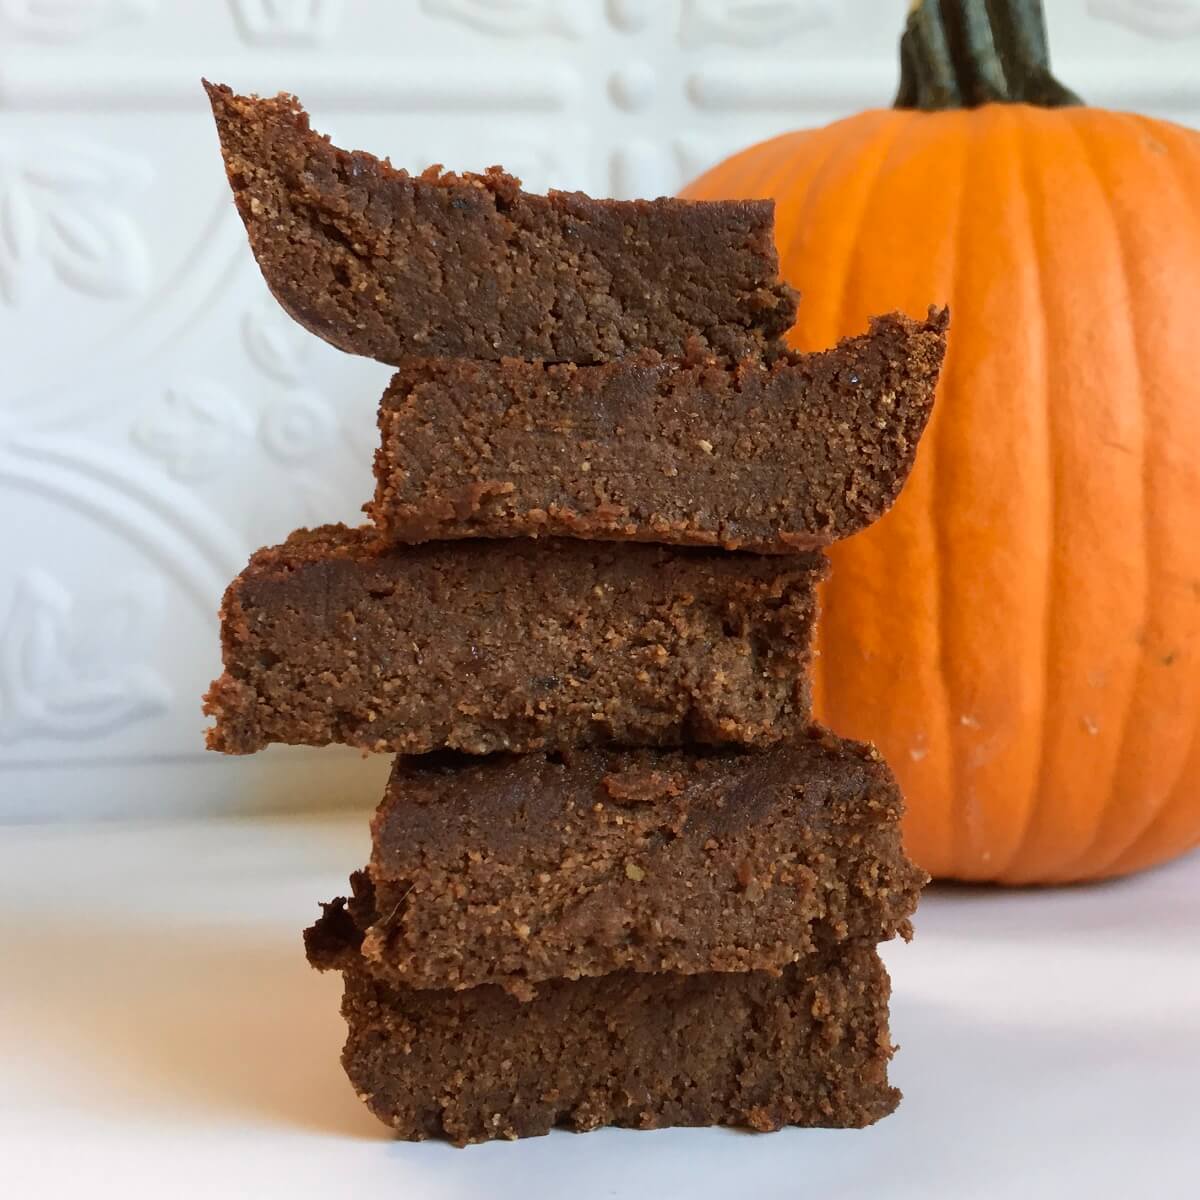 Brownies stacked next to a pumpkin.